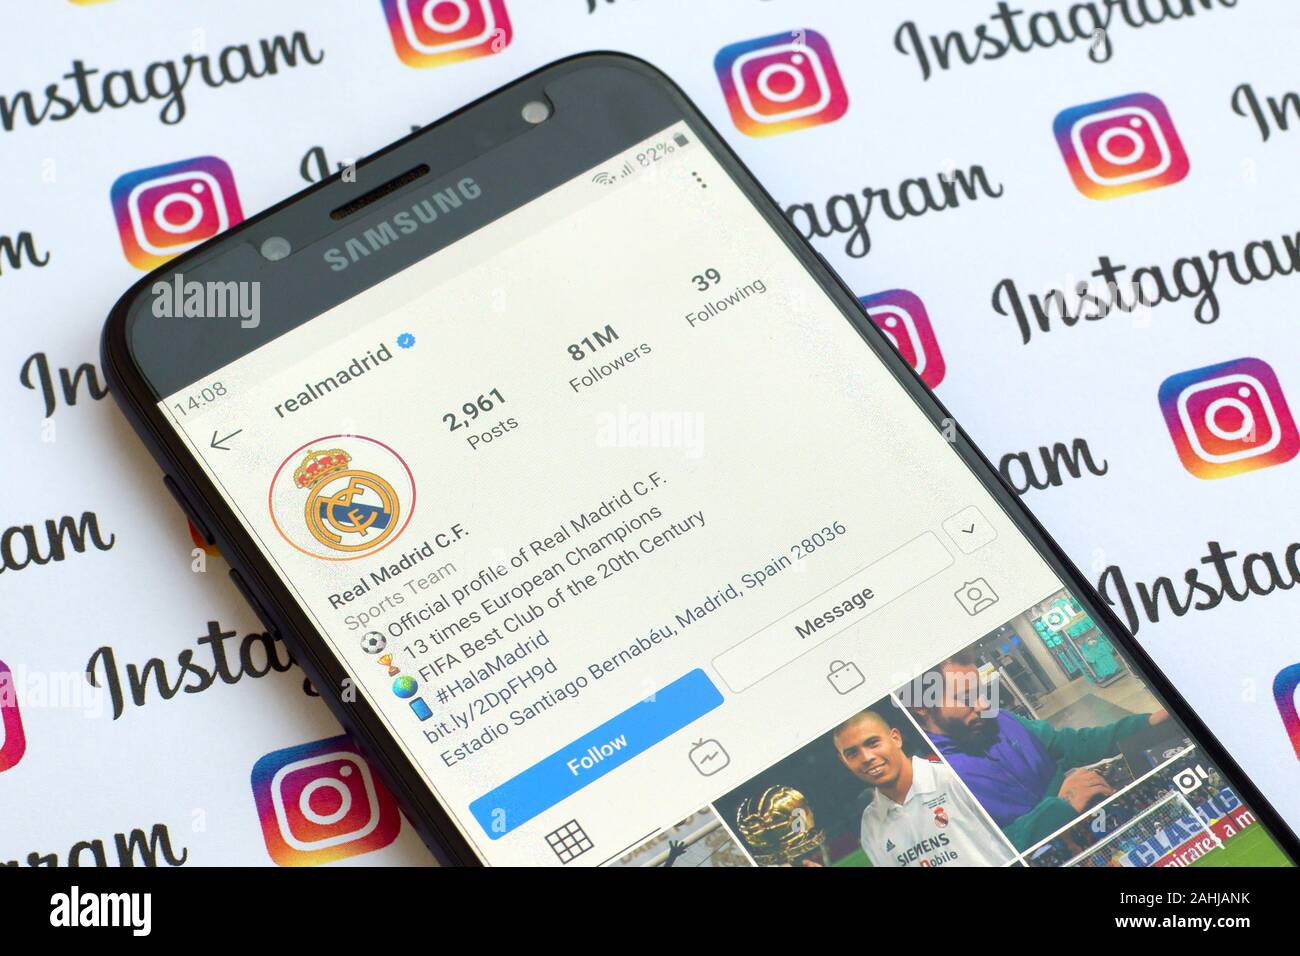 NY, USA - DECEMBER 4, 2019: Real Madrid official instagram account on smartphone screen on paper instagram banner. Stock Photo